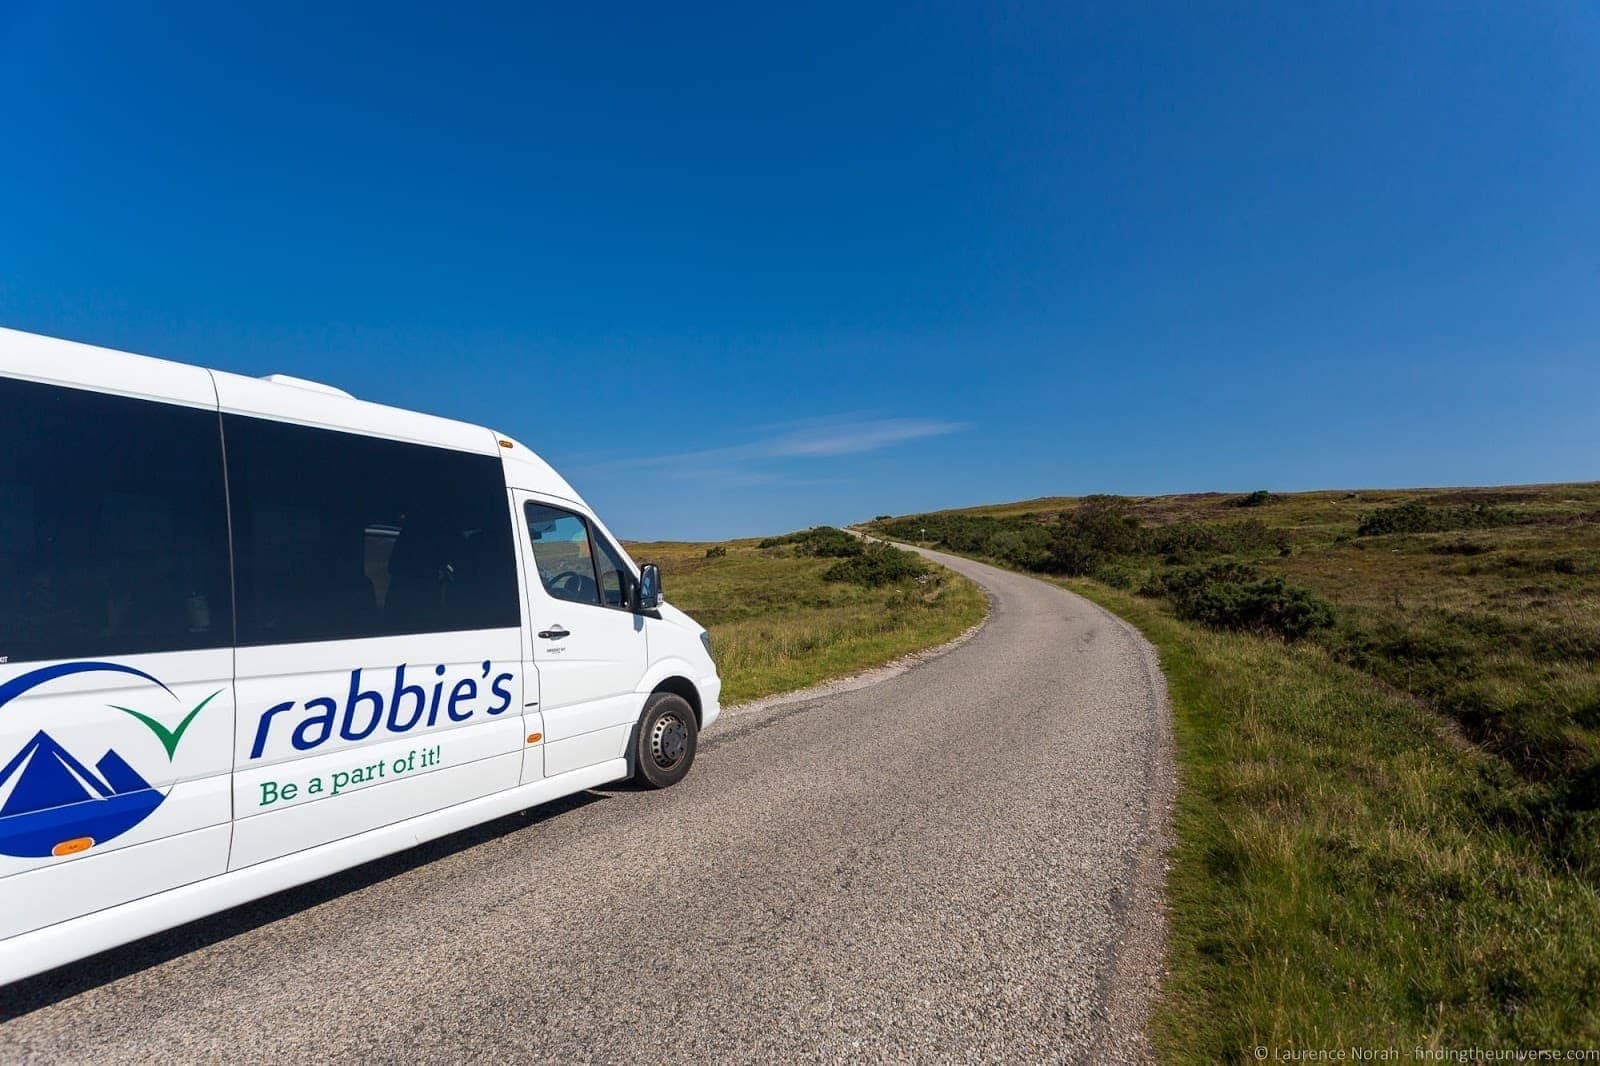 Rabbies bus by Laurence Norah